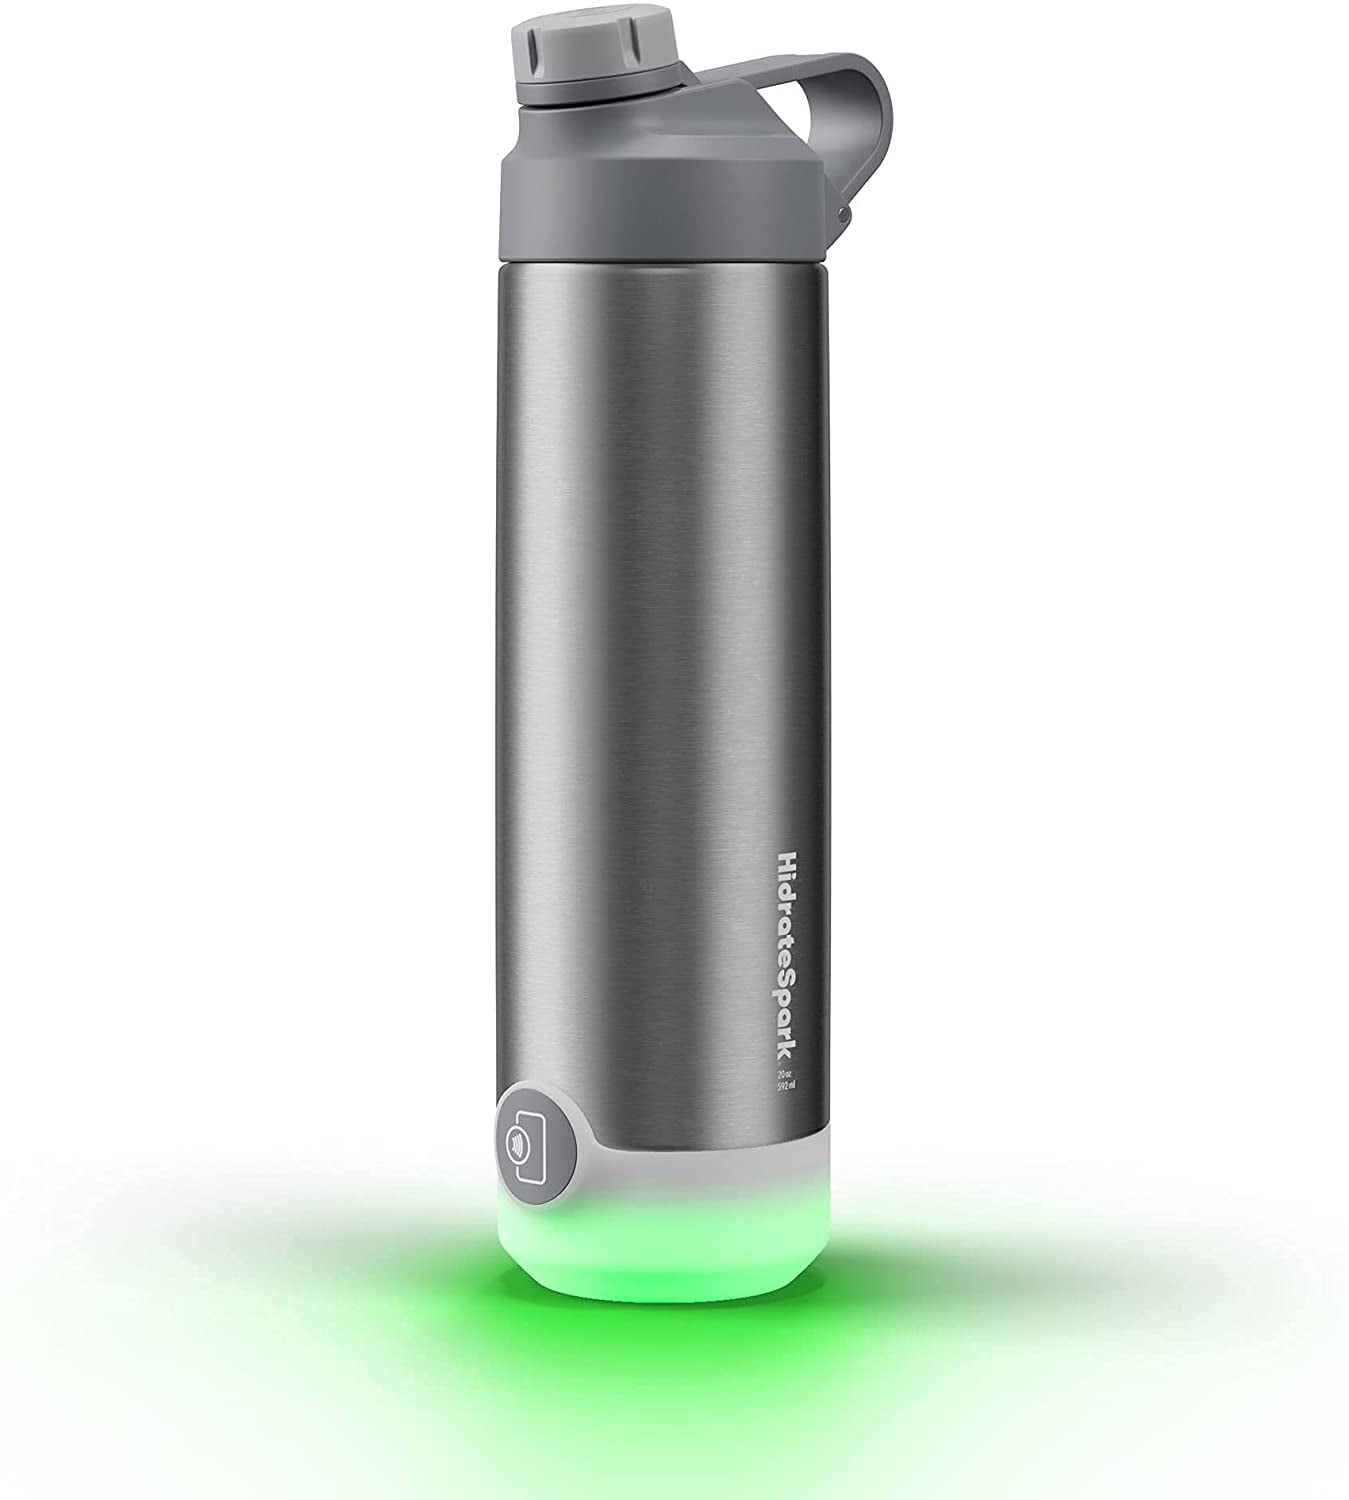 Tracks Water Intake & Glows to Remind You to Stay Hydrated Straw Lid HidrateSpark Steel Smart Water Bottle 